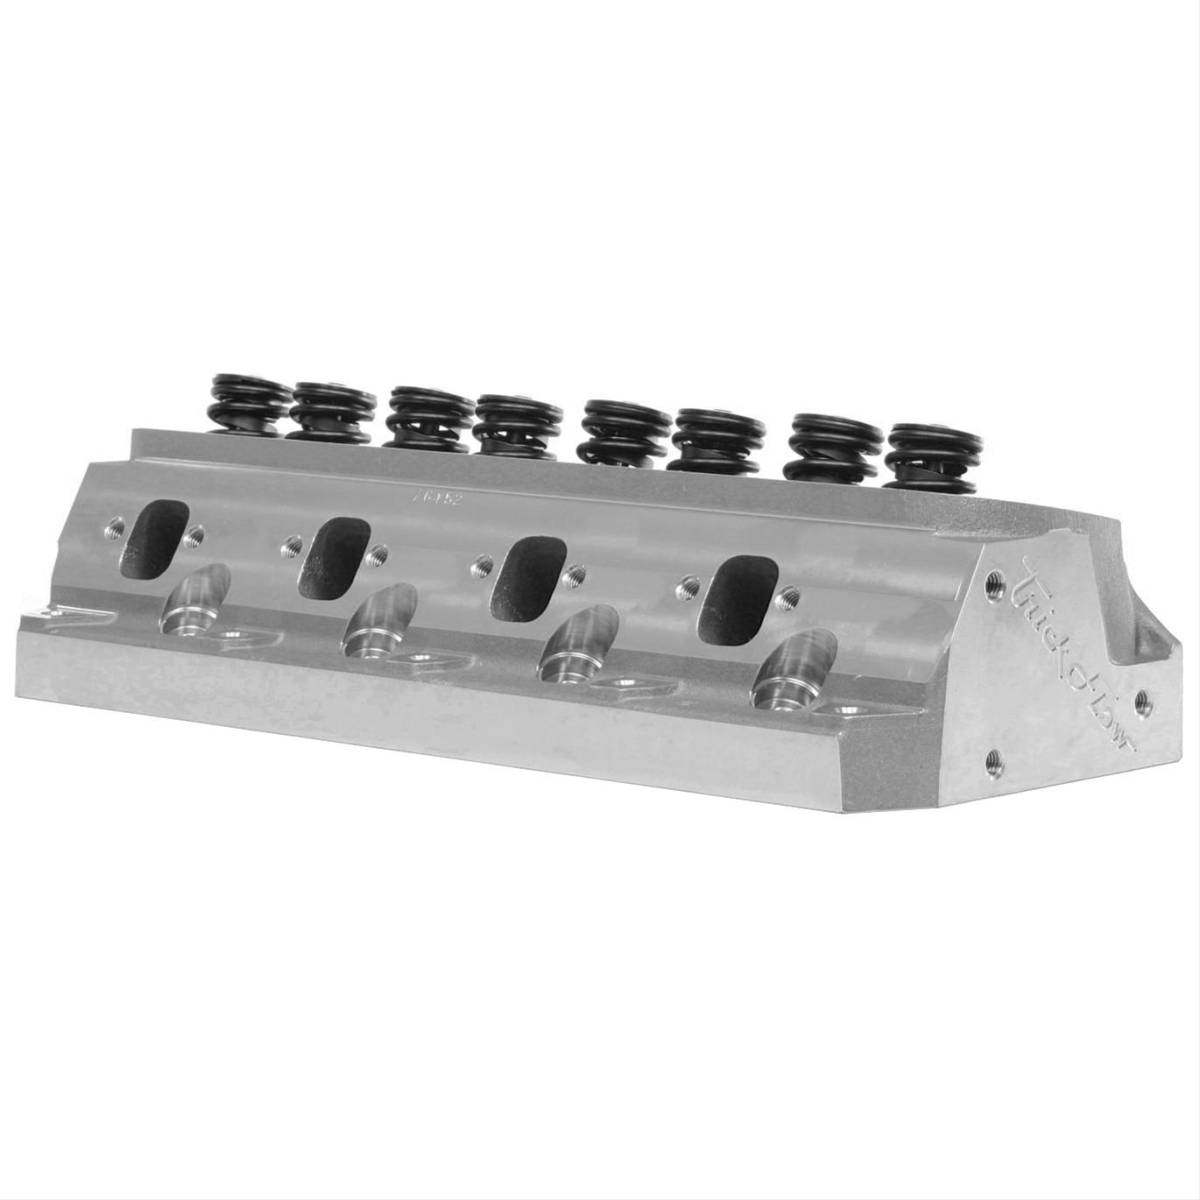 Trickflow - Trickflow Twisted Wedge SBF 170cc Cylinder Heads Dual Valve 61cc Max Lift .600 - Image 1